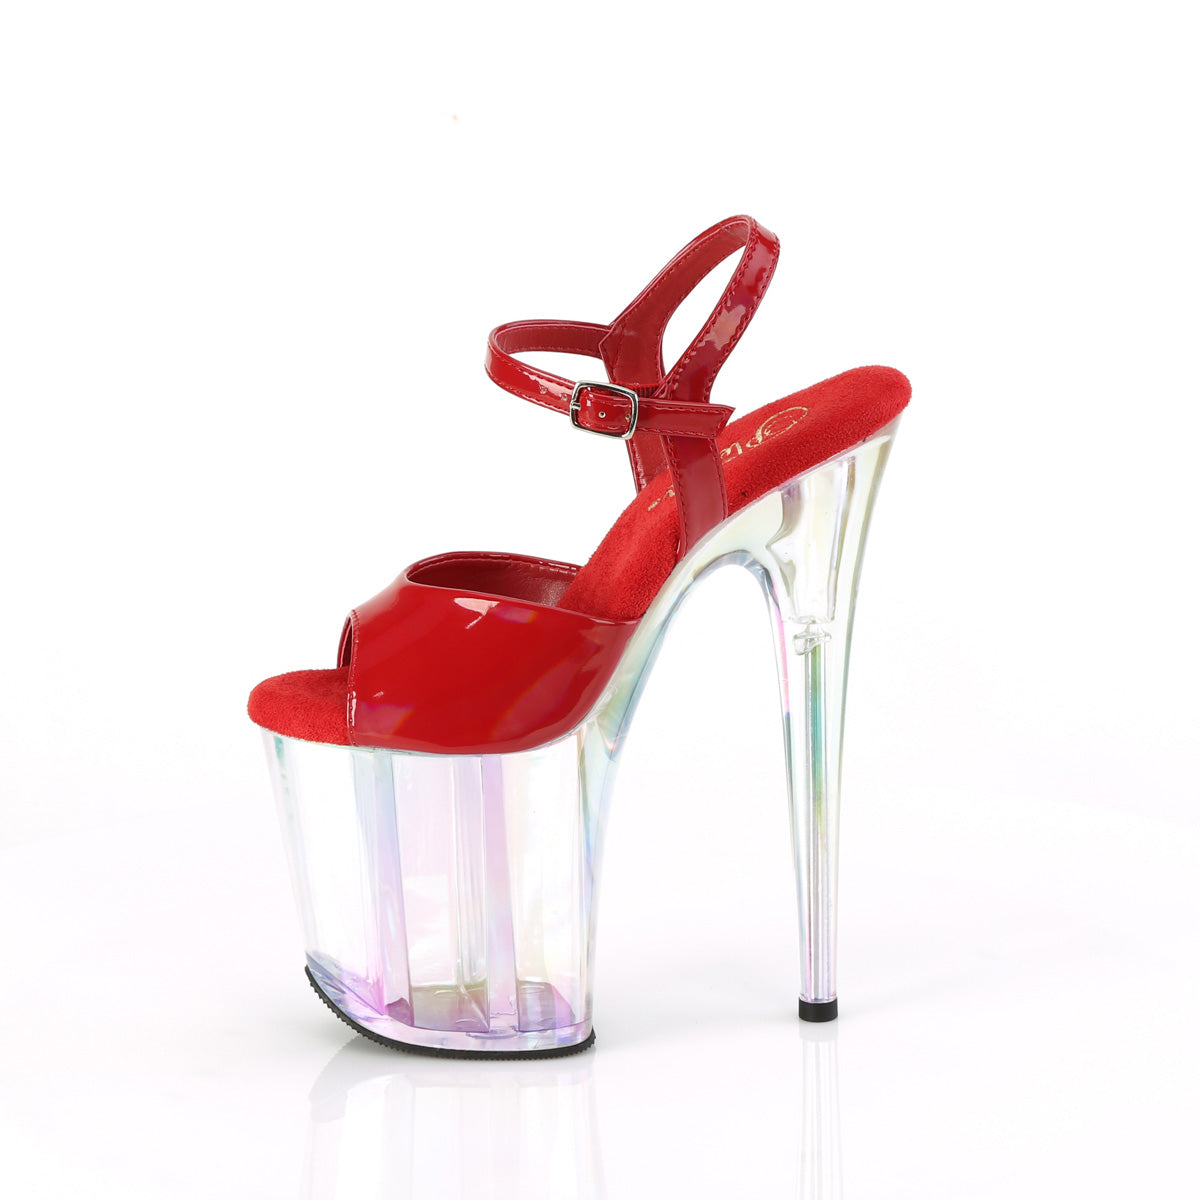 FLAMINGO-809HT Pleaser Red Holo Patent/Holo Tinted Platform Shoes [Exotic Dancing Shoes]